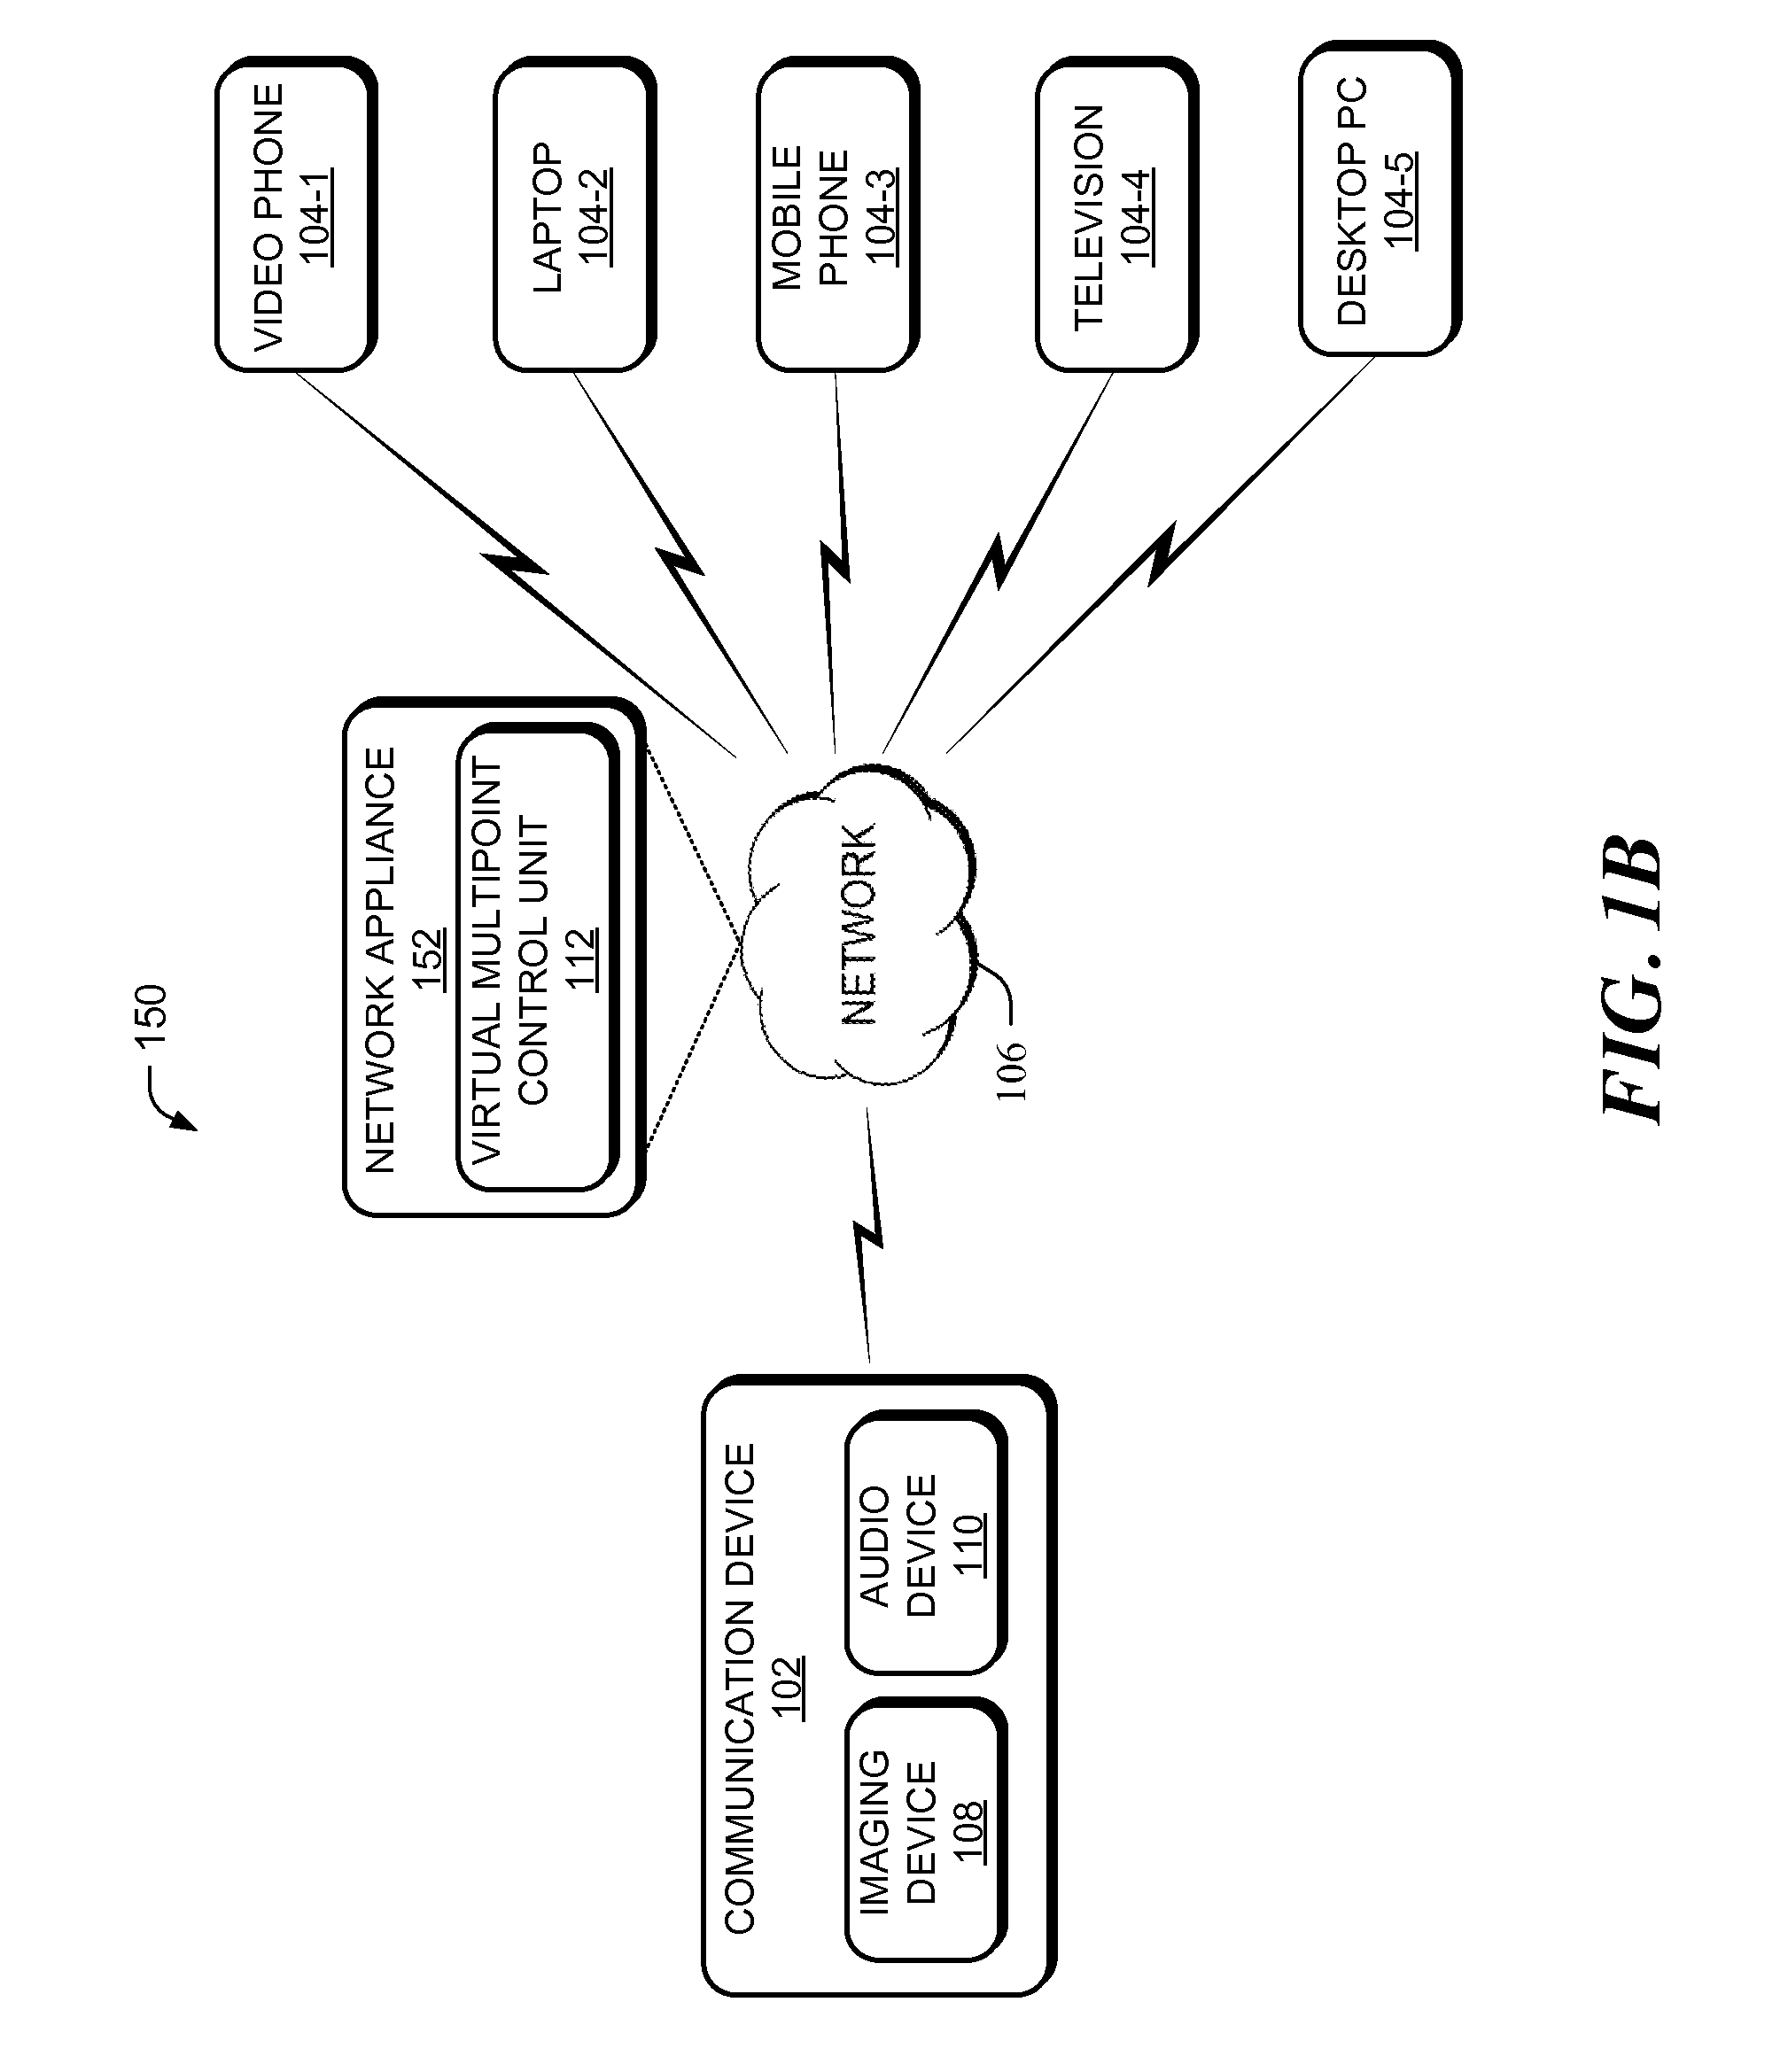 System for a Virtual Multipoint Control Unit for Unified Communications